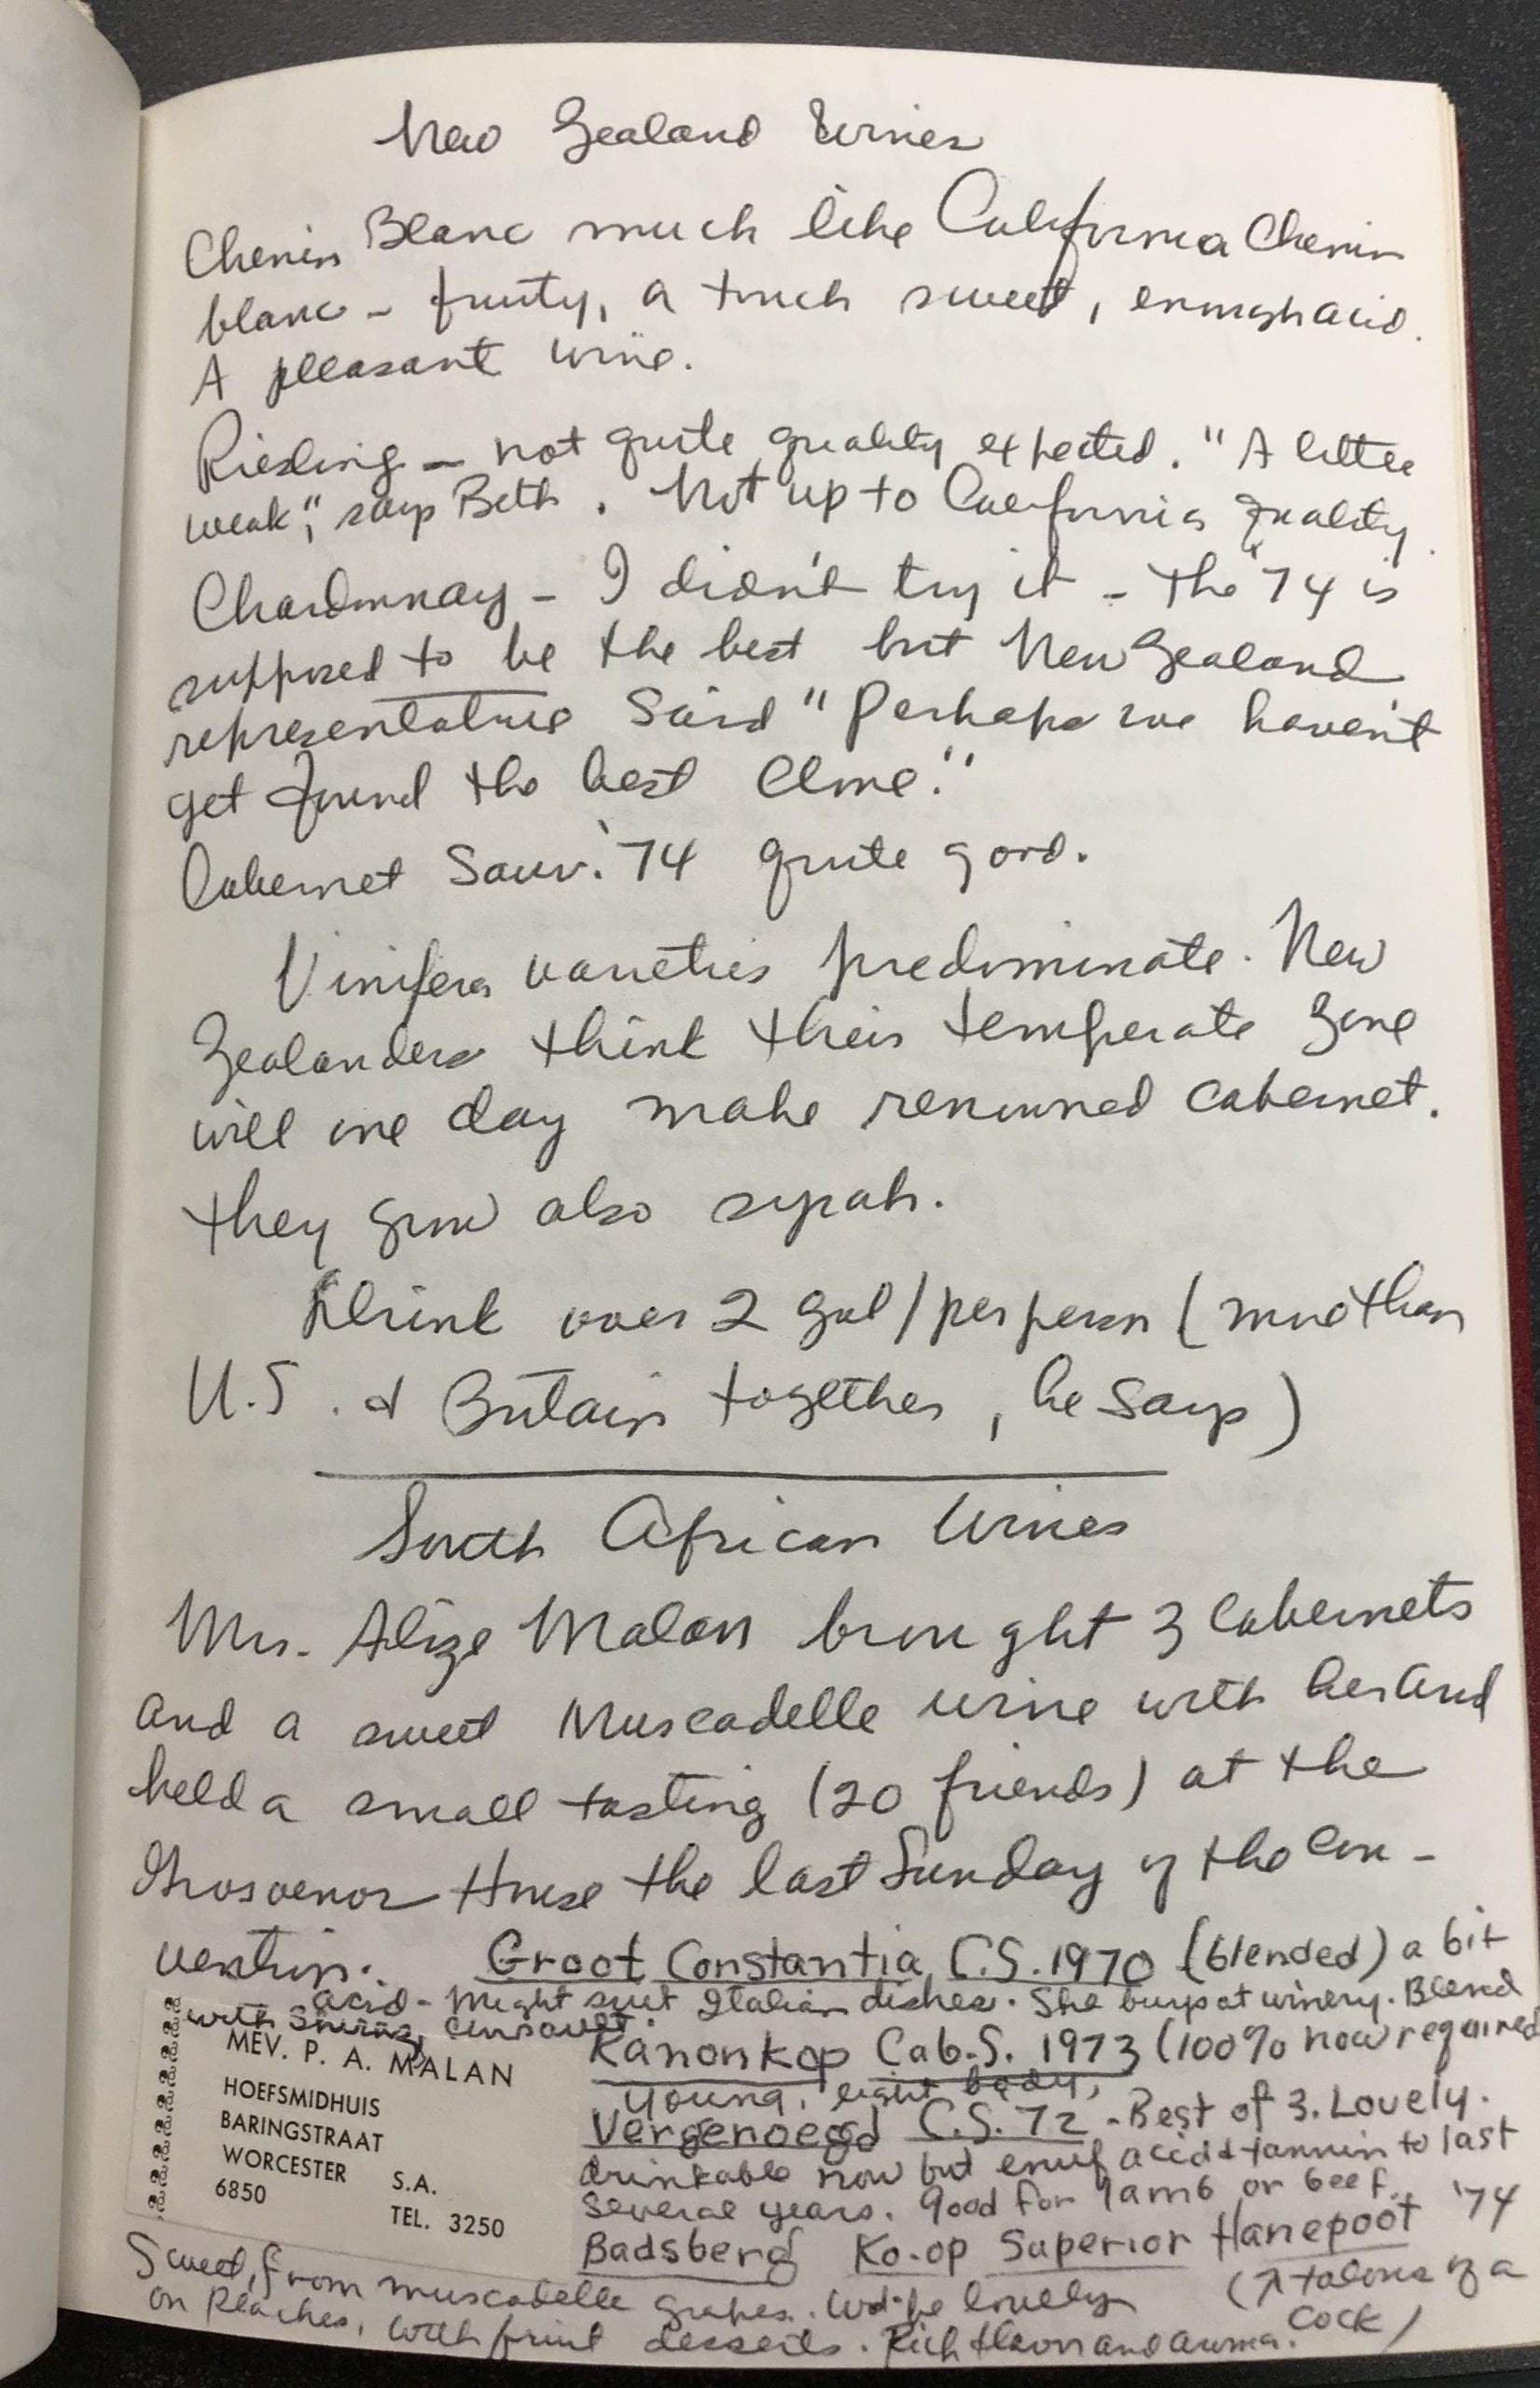 A page from one of Church’s travel journals, undated